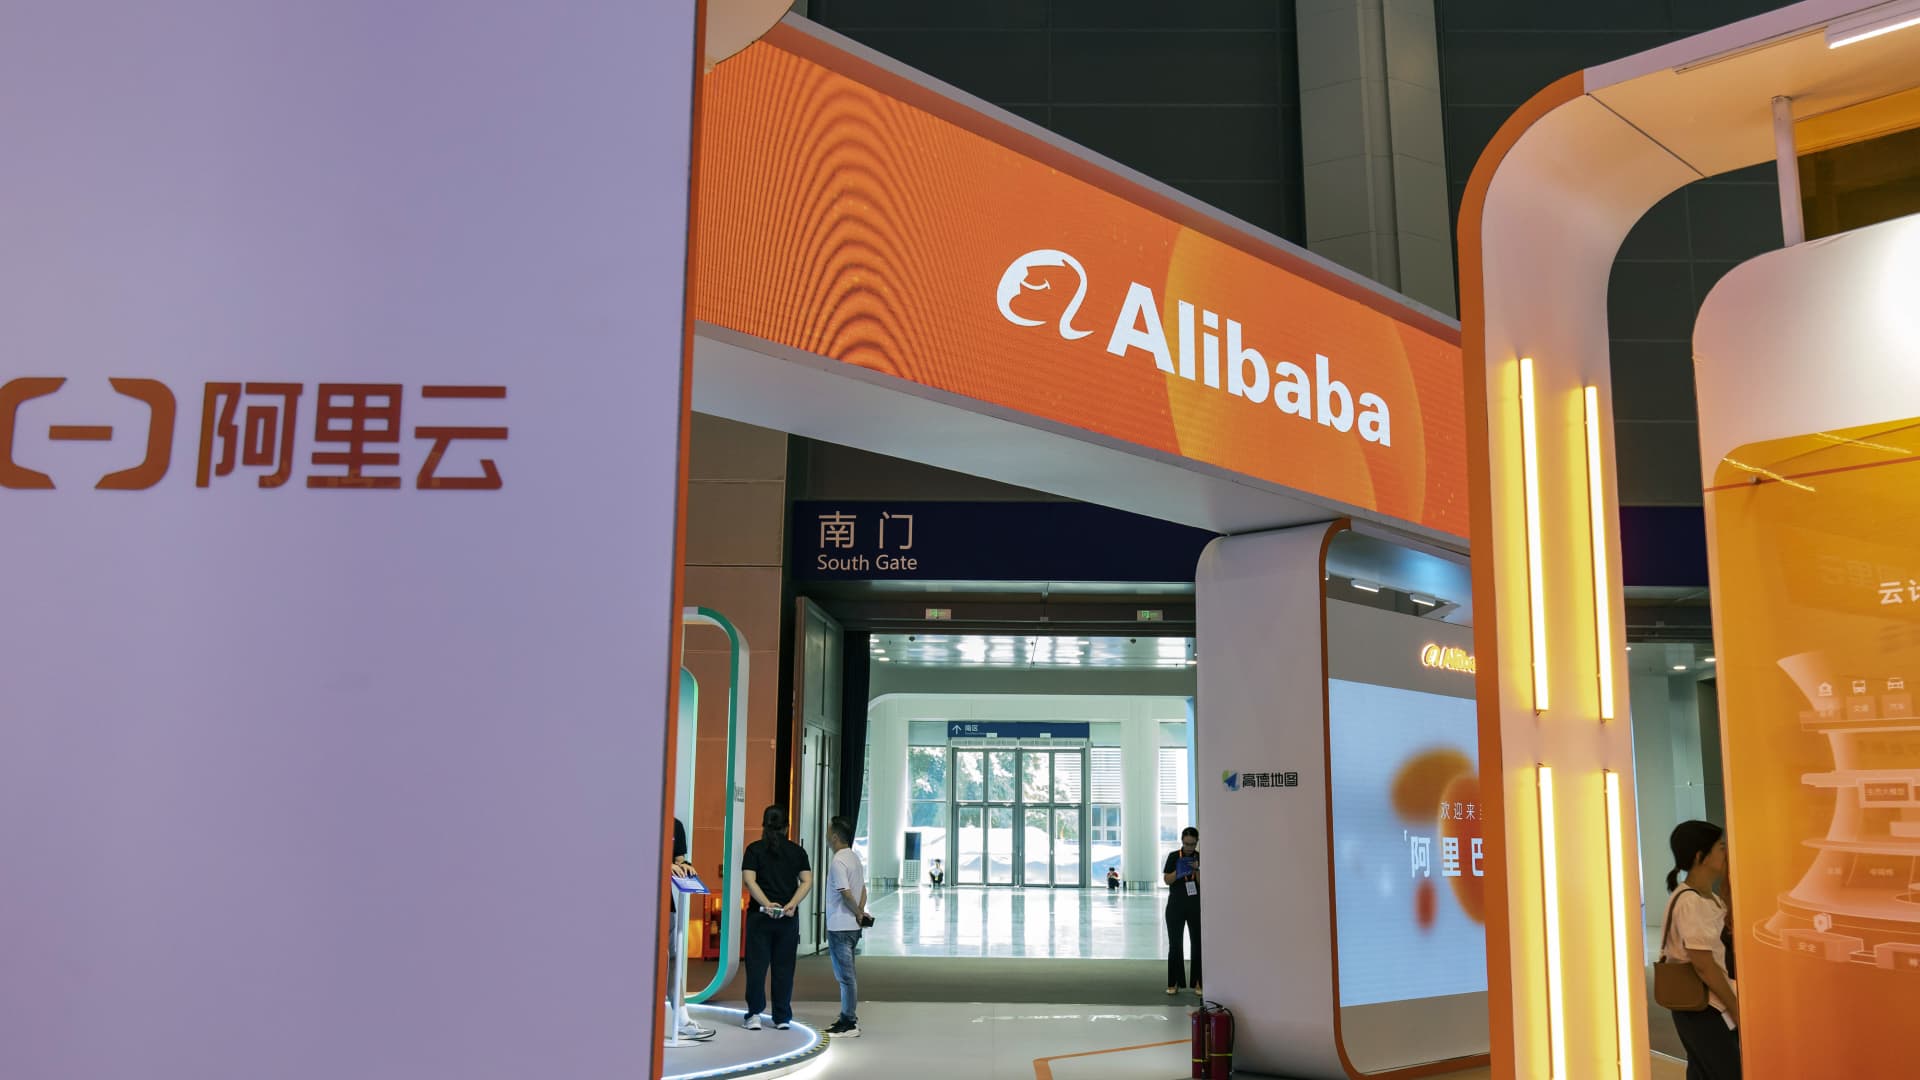 Alibaba CEO warns of being ‘displaced’ if the Chinese tech giant doesn’t keep up in AI